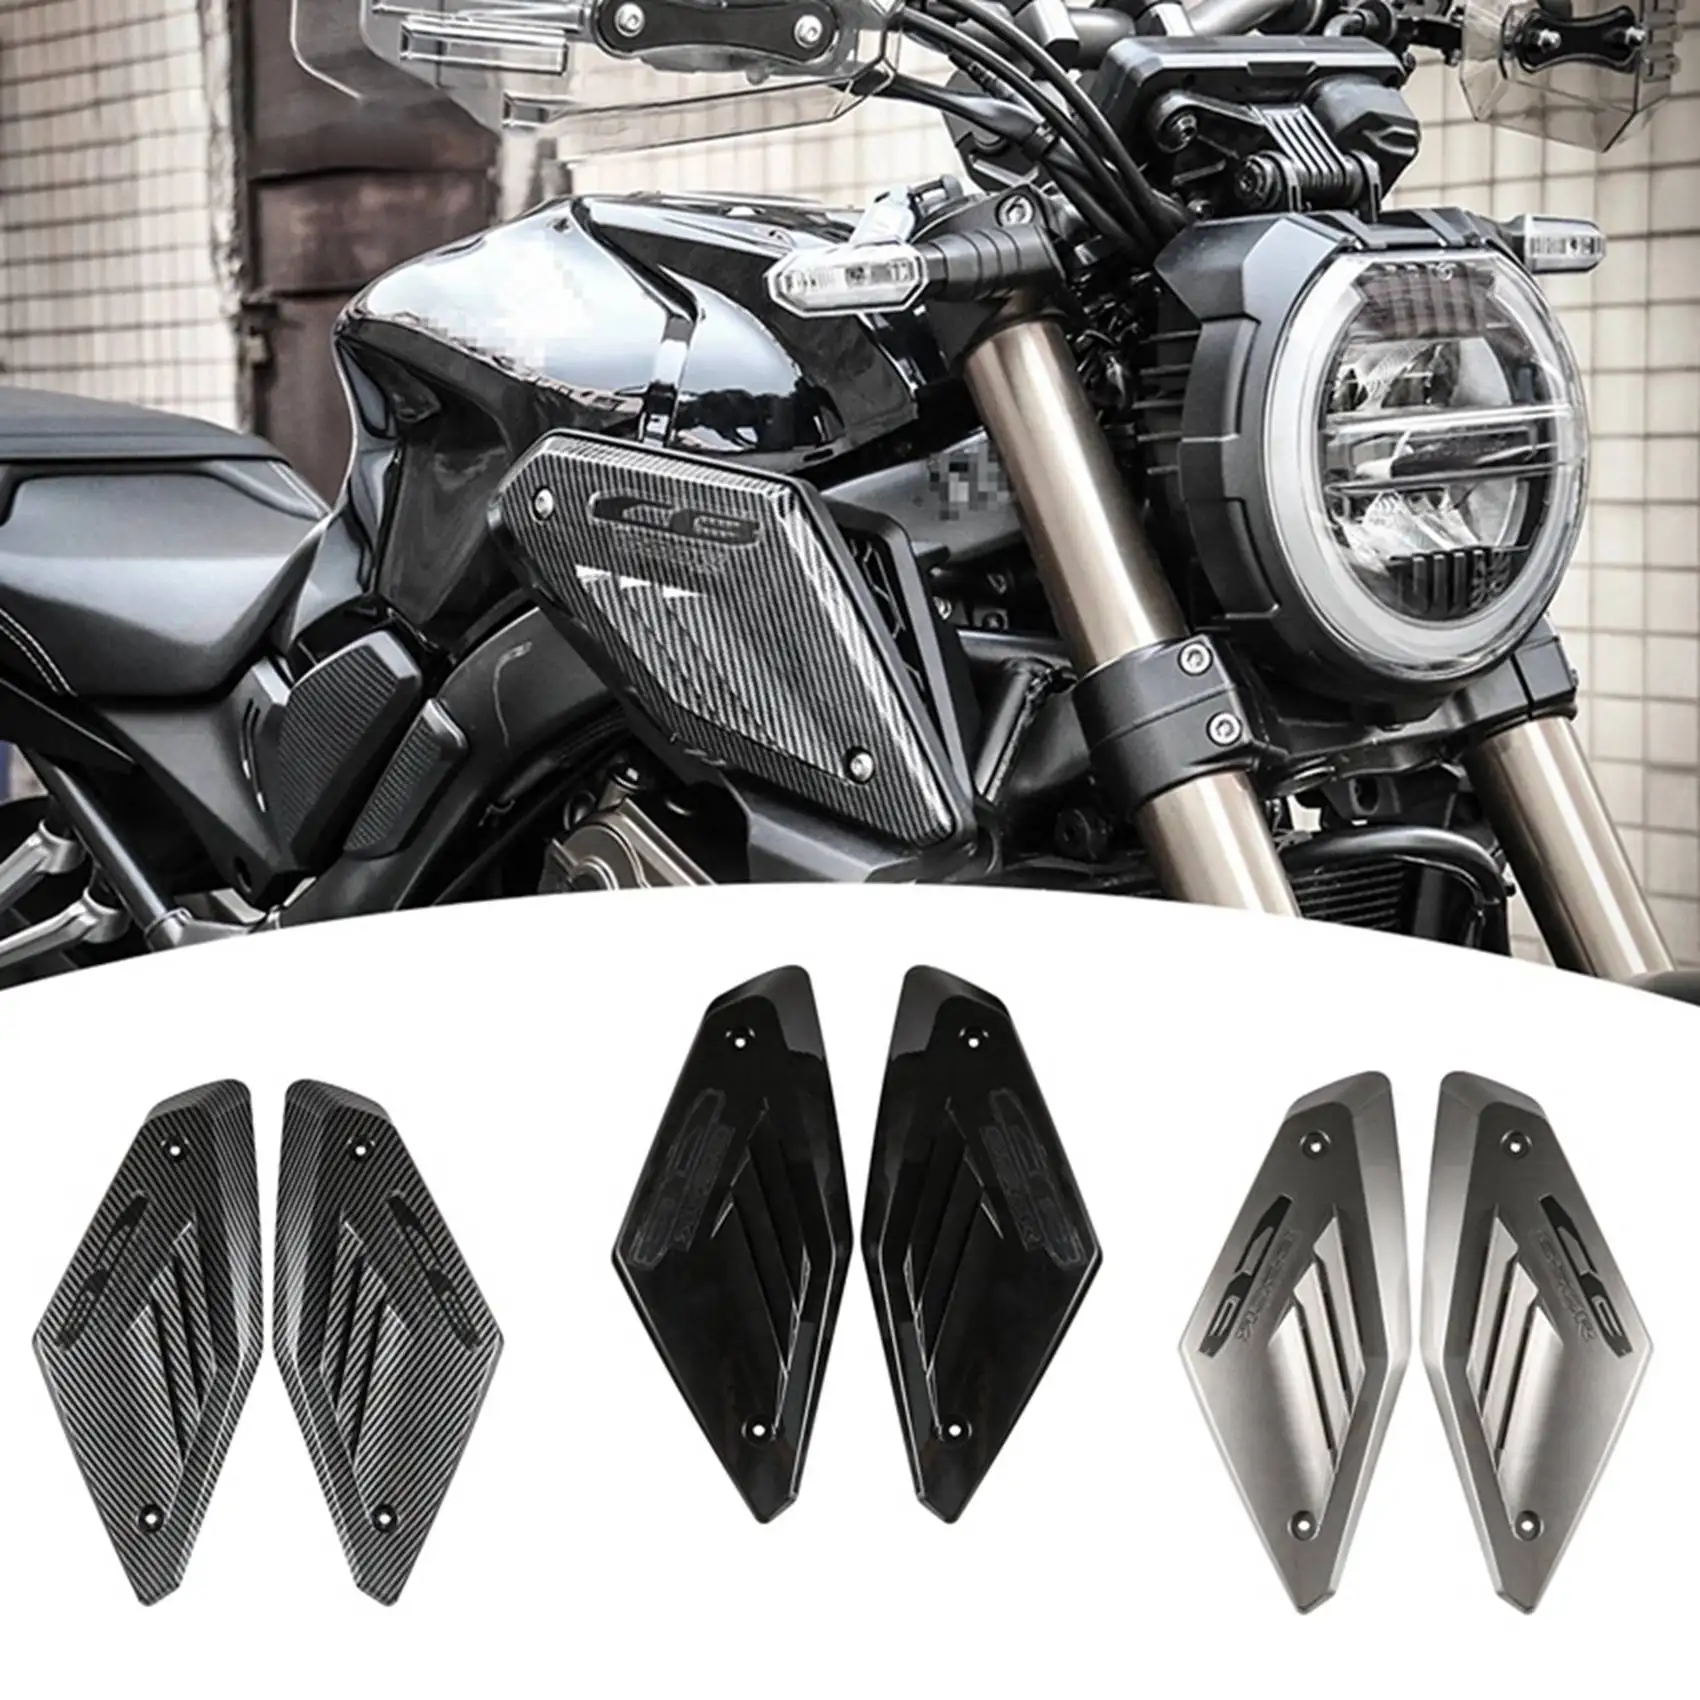 

Motorcycle Frame Side Panel Cover Protective Intake Pipe Protector Shell for Honda CB650R CBR 650R 2019 2020 2021 A